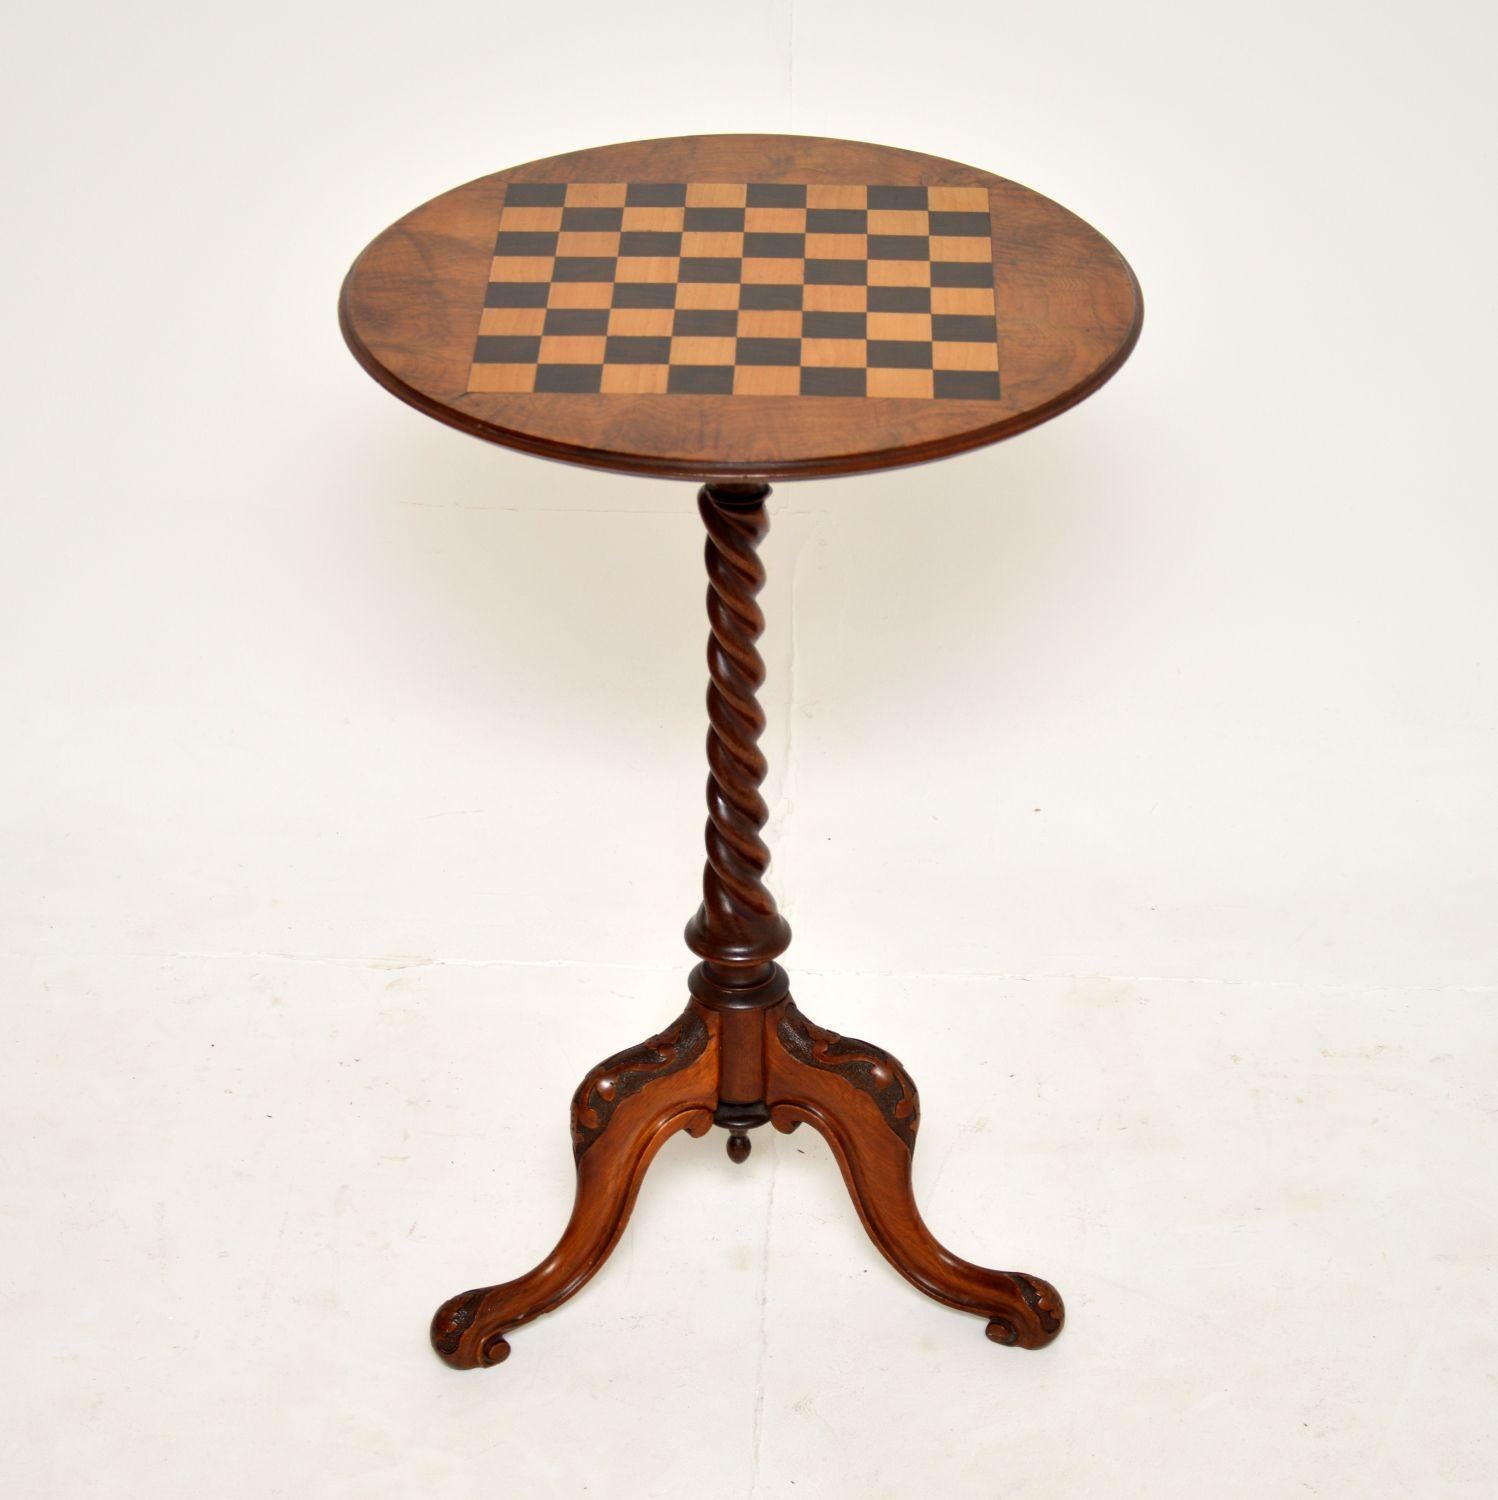 A fantastic antique Victorian chess table in walnut. This was made in England, it dates from around the 1860-1880’s period.

It is beautifully made, the top has an inlaid chessboard made from sycamore and mahogany, the other edges are burr walnut.